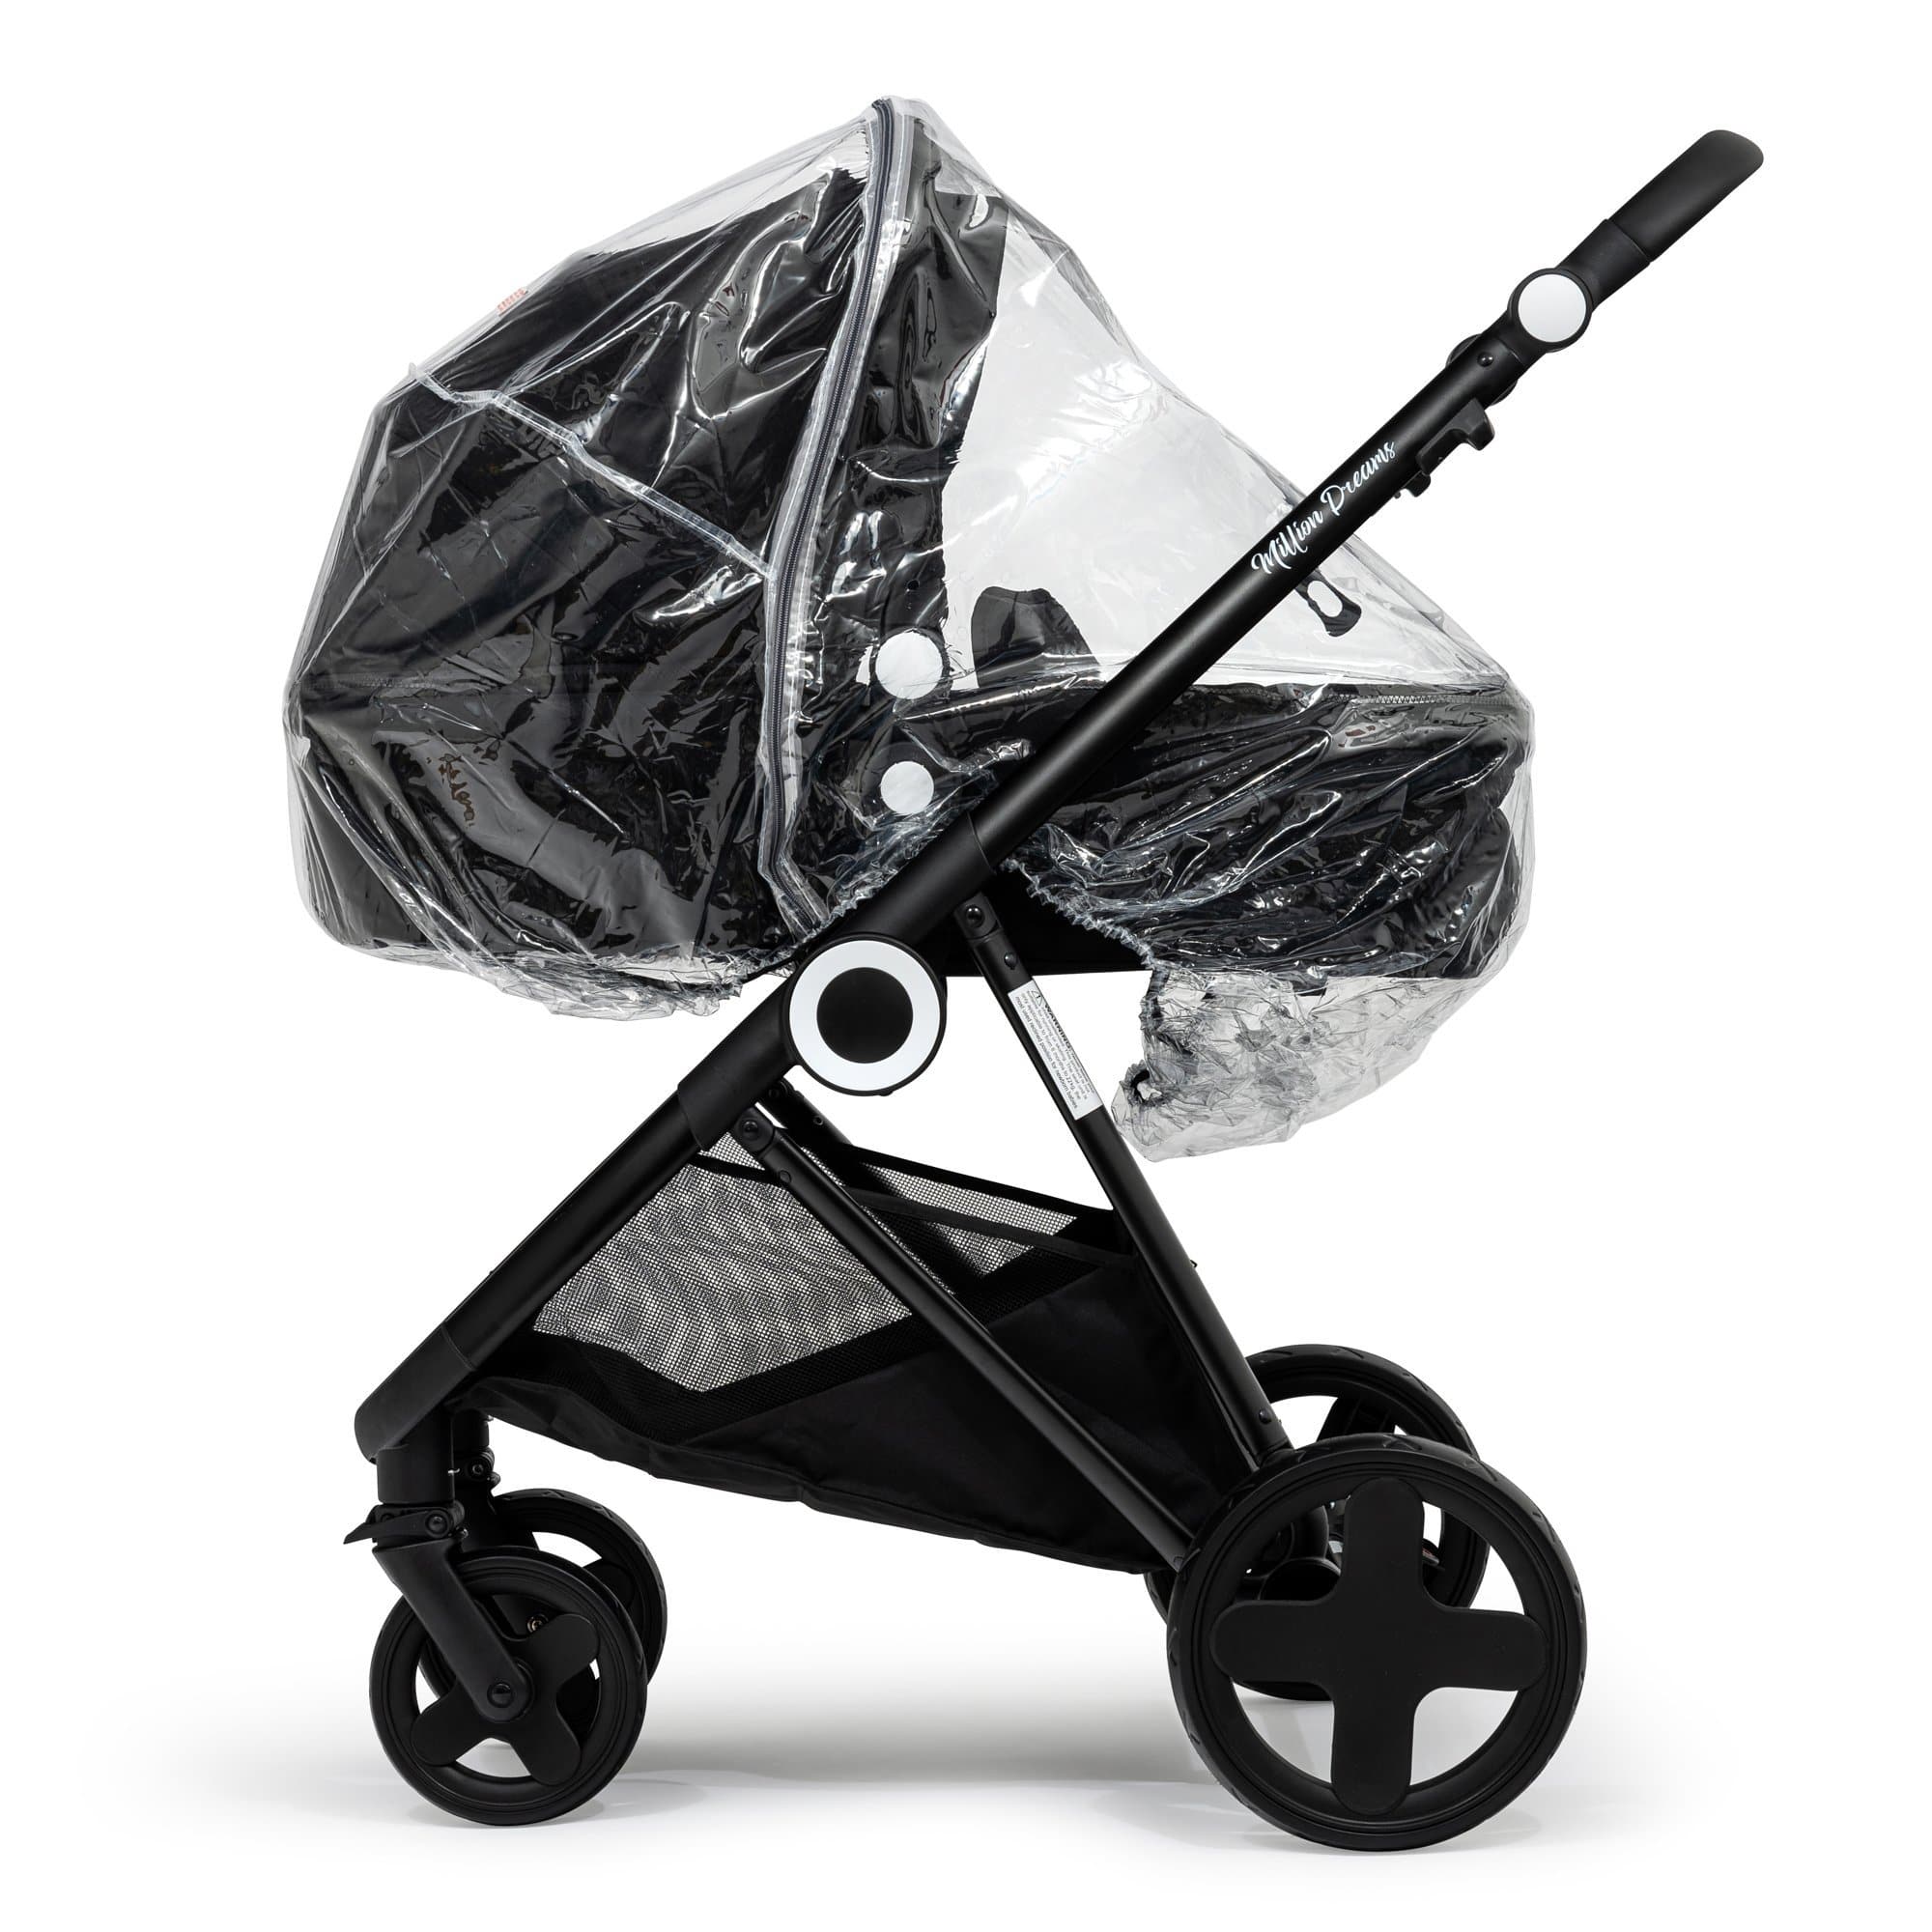 2 in 1 Rain Cover Compatible with Baby Trend - Fits All Models - For Your Little One